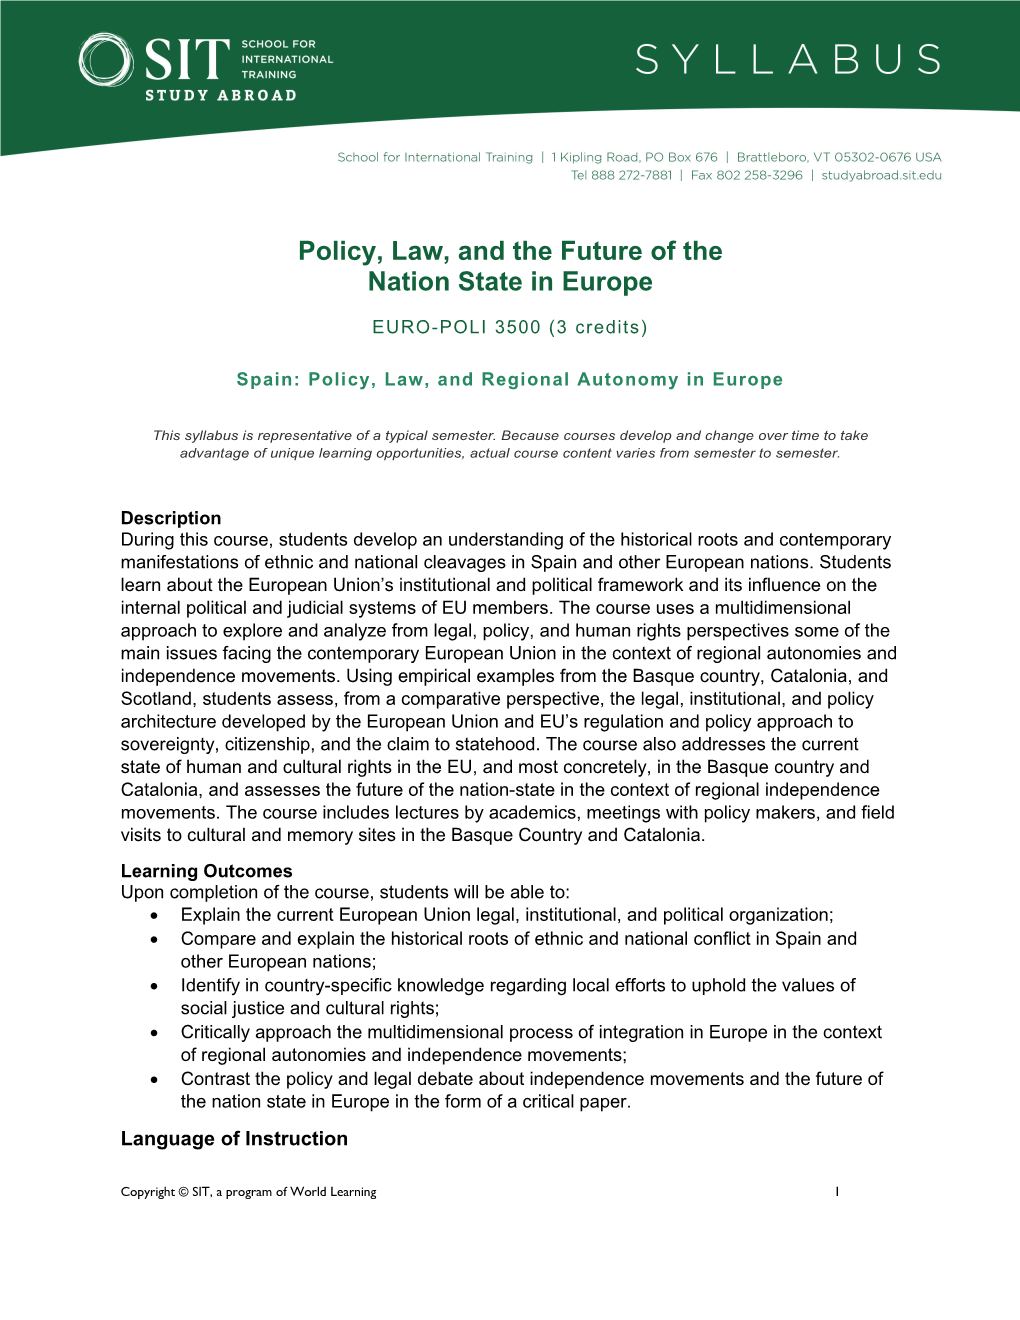 Policy, Law, and the Future of the Nation State in Europe